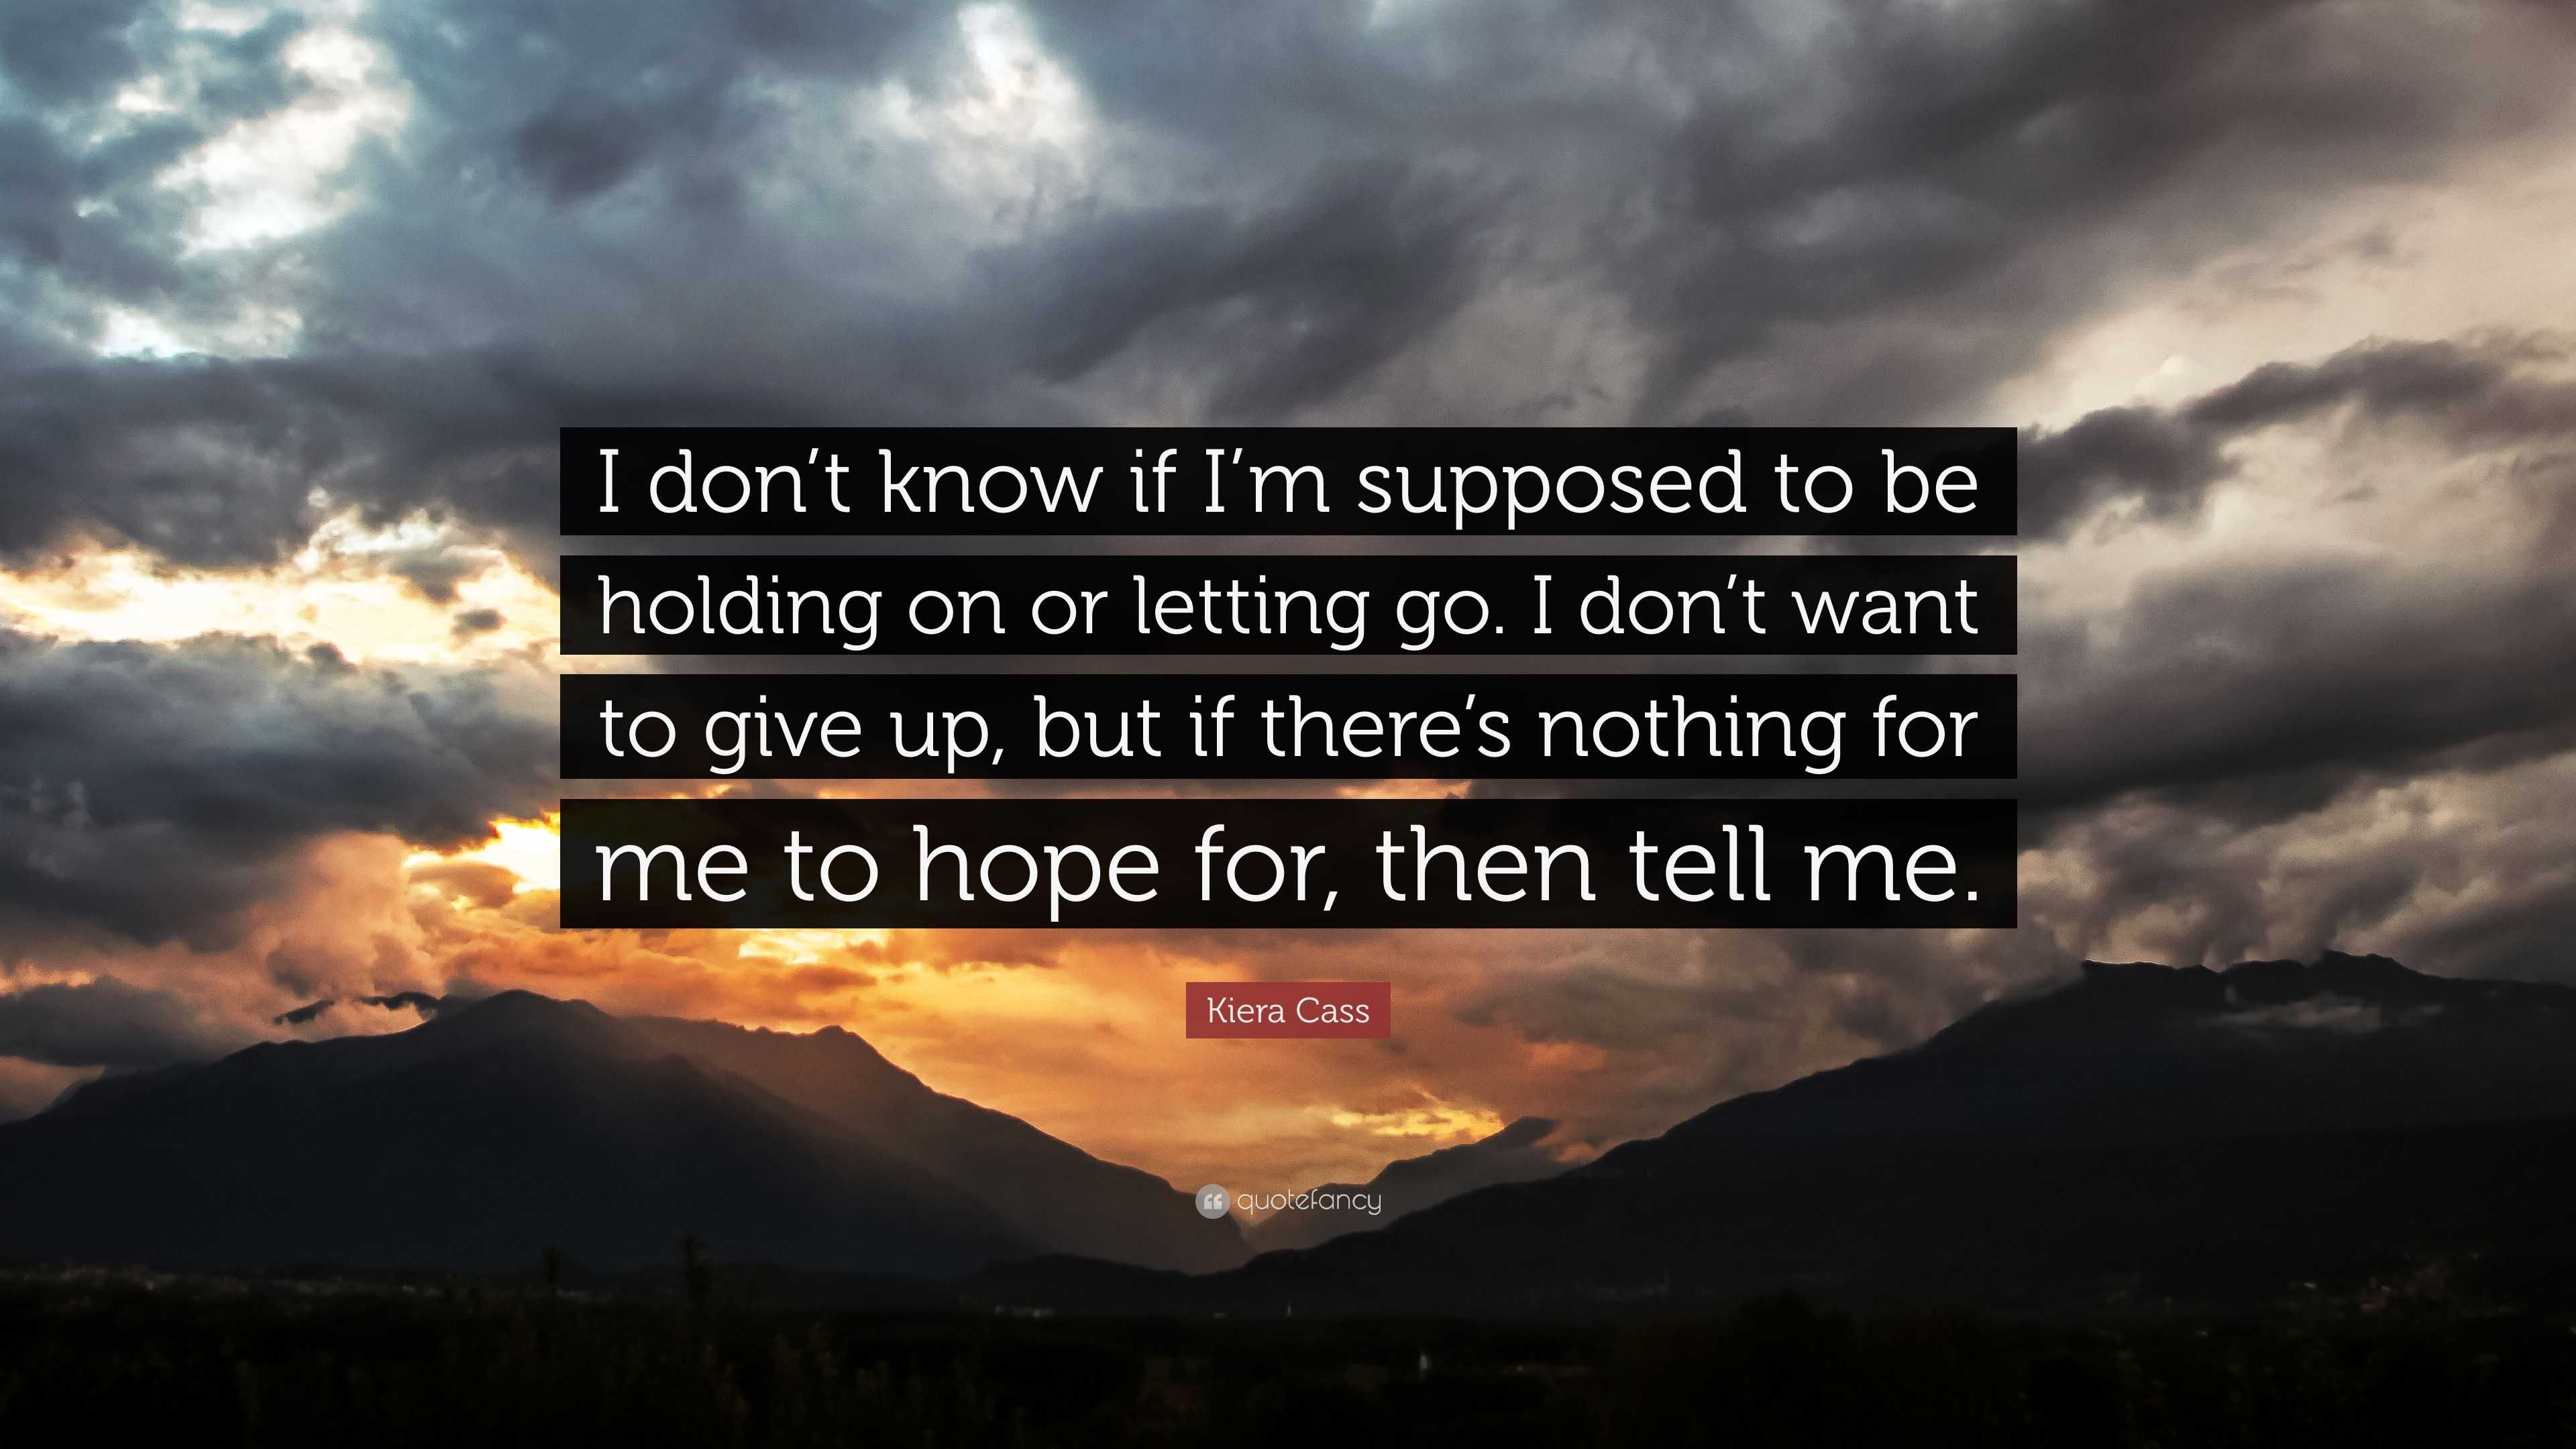 Kiera Cass Quote I Don T Know If I M Supposed To Be Holding On Or Letting Go I Don T Want To Give Up But If There S Nothing For Me To H